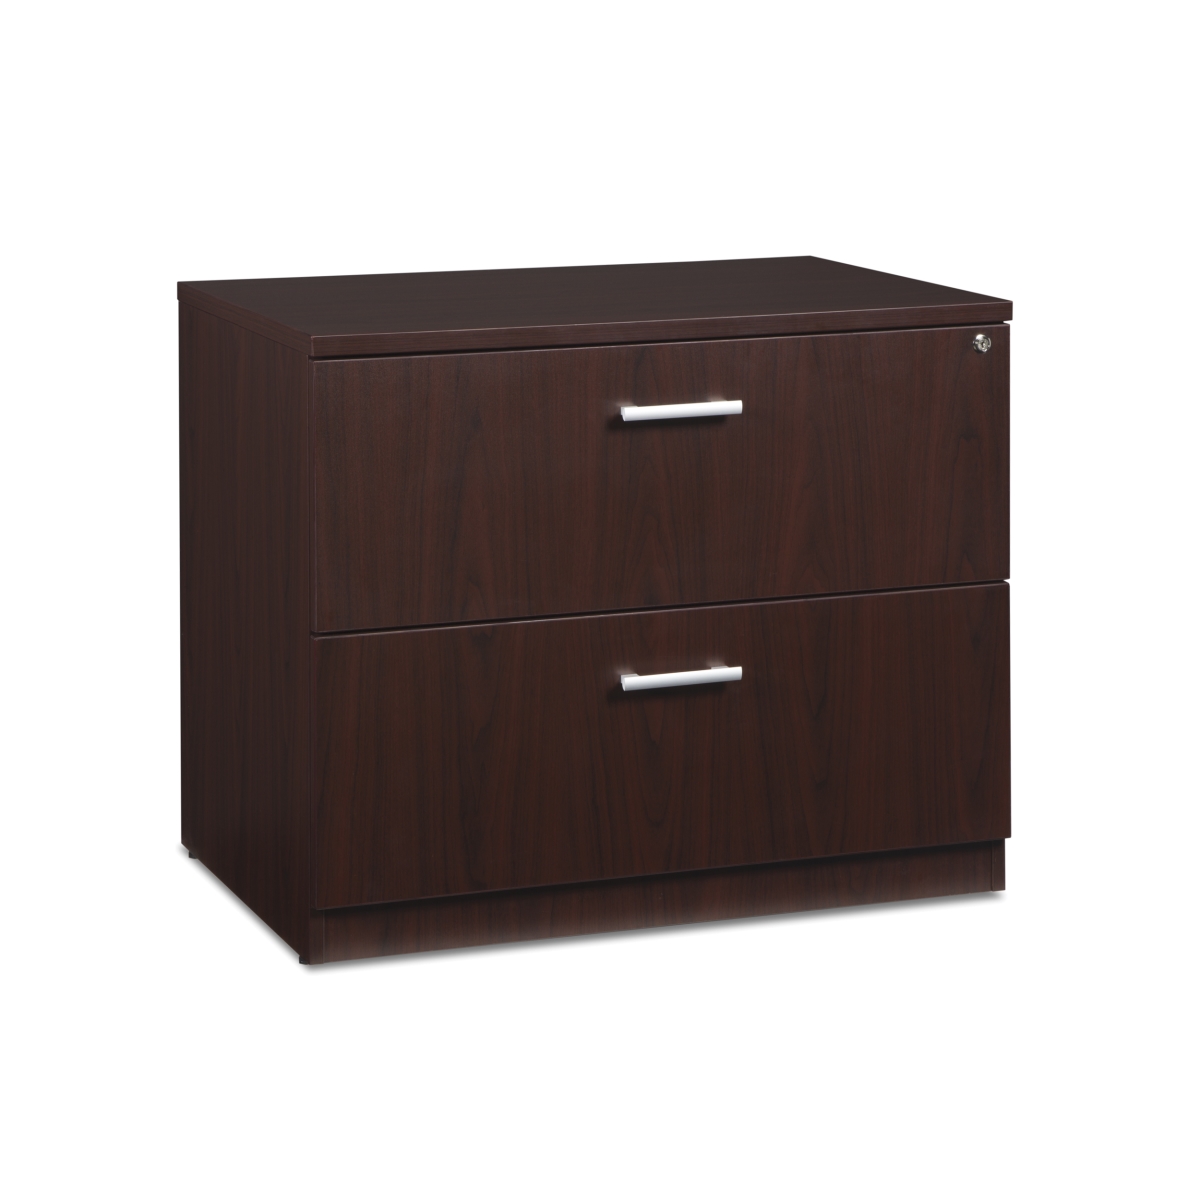 Ofm Cl L36w Mhg Fulcrum Series Locking Lateral File Cabinet 2